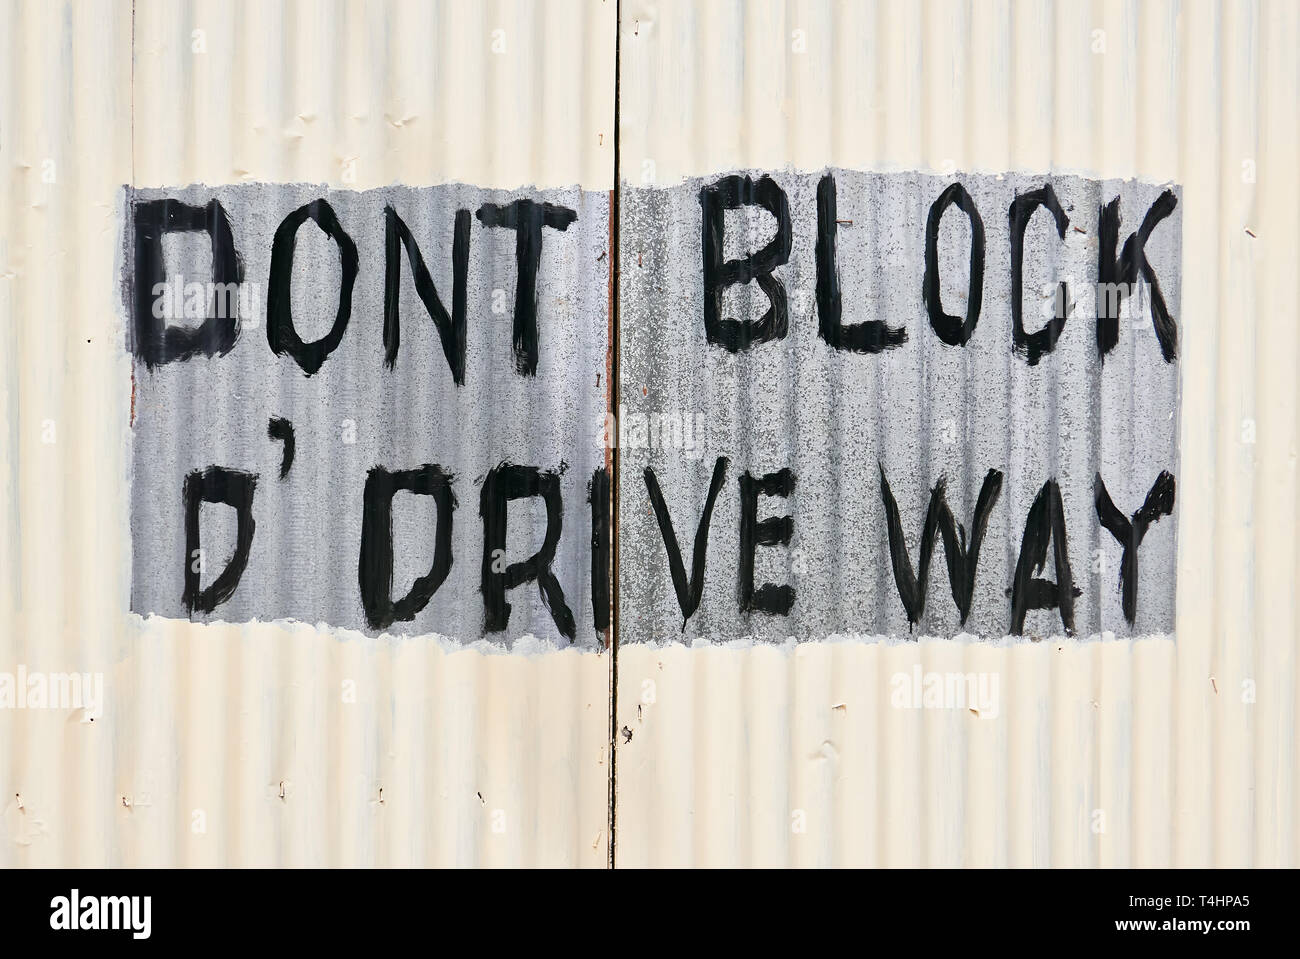 Closed gate of corrugated metal with written sign 'Don't block the driveway'. The gate is newly painted in white color, but the writing is spared. Stock Photo